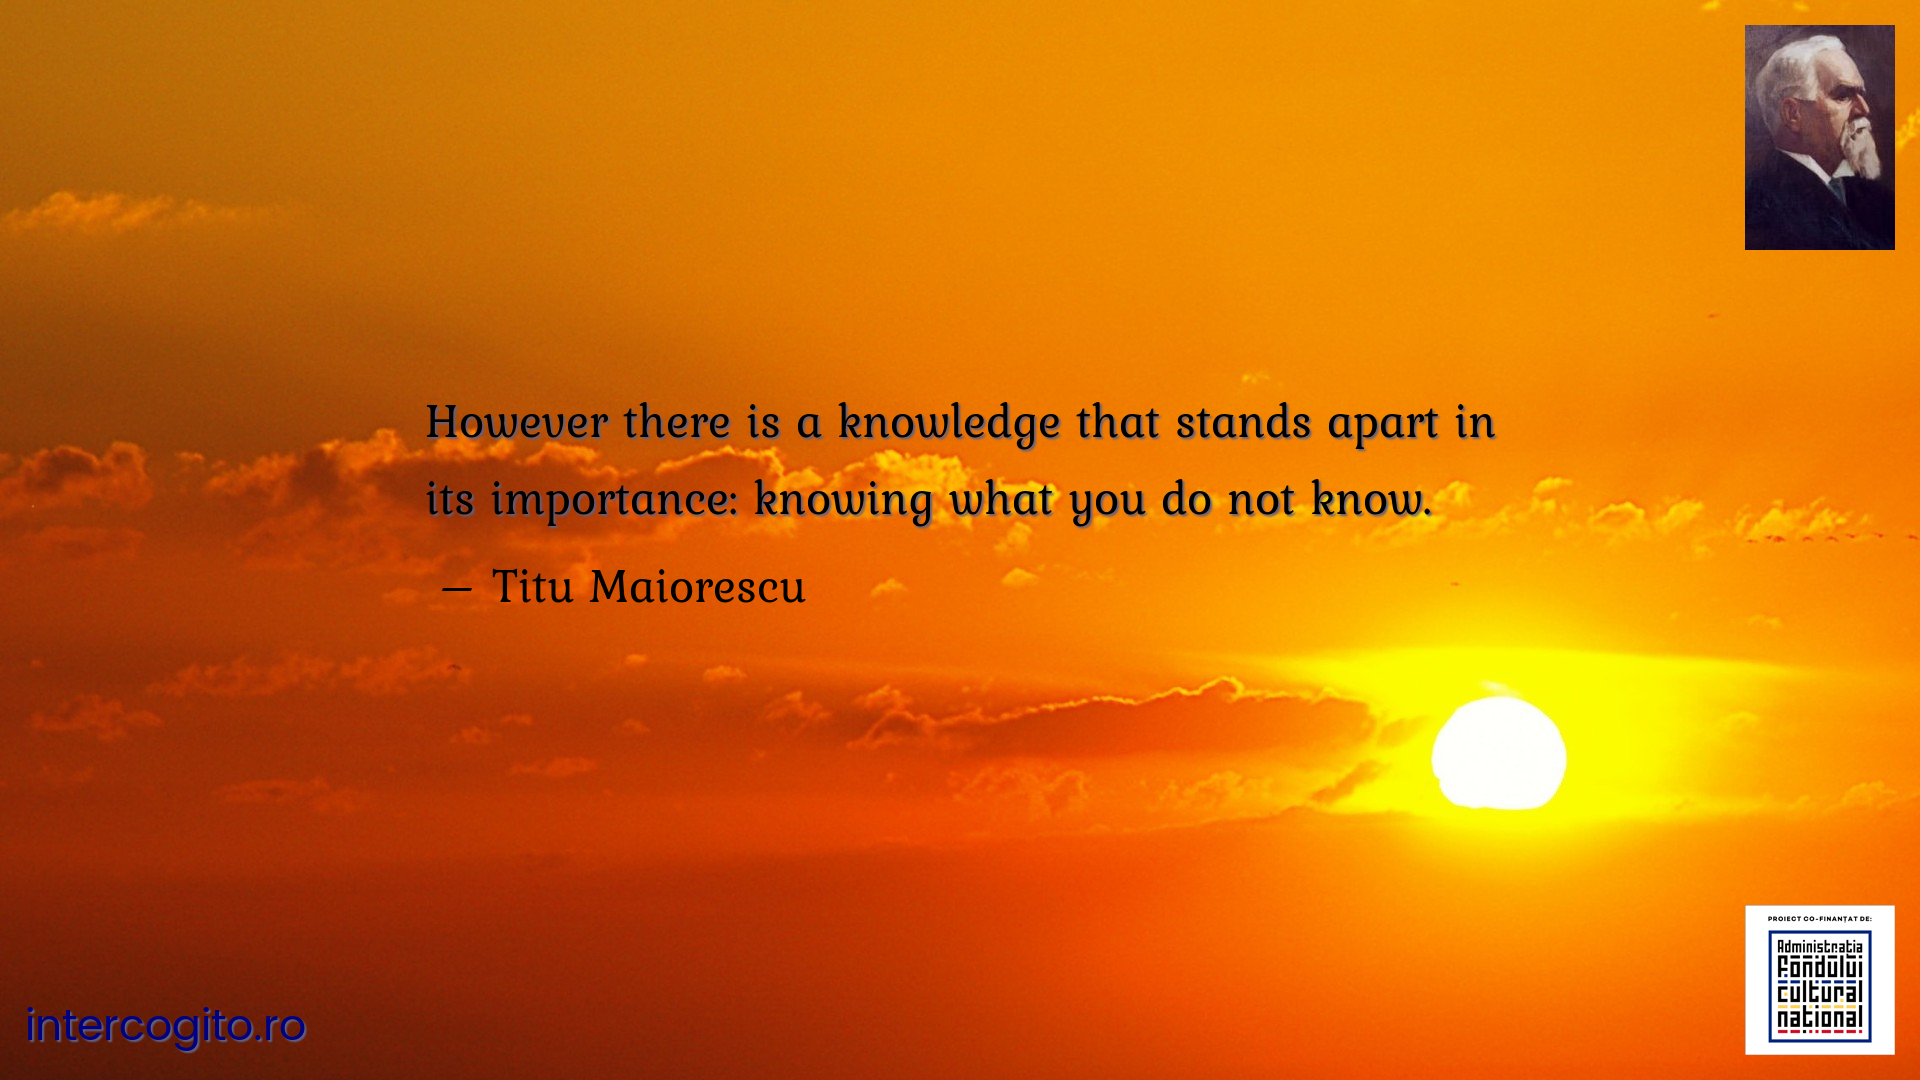 However there is a knowledge that stands apart in its importance: knowing what you do not know.